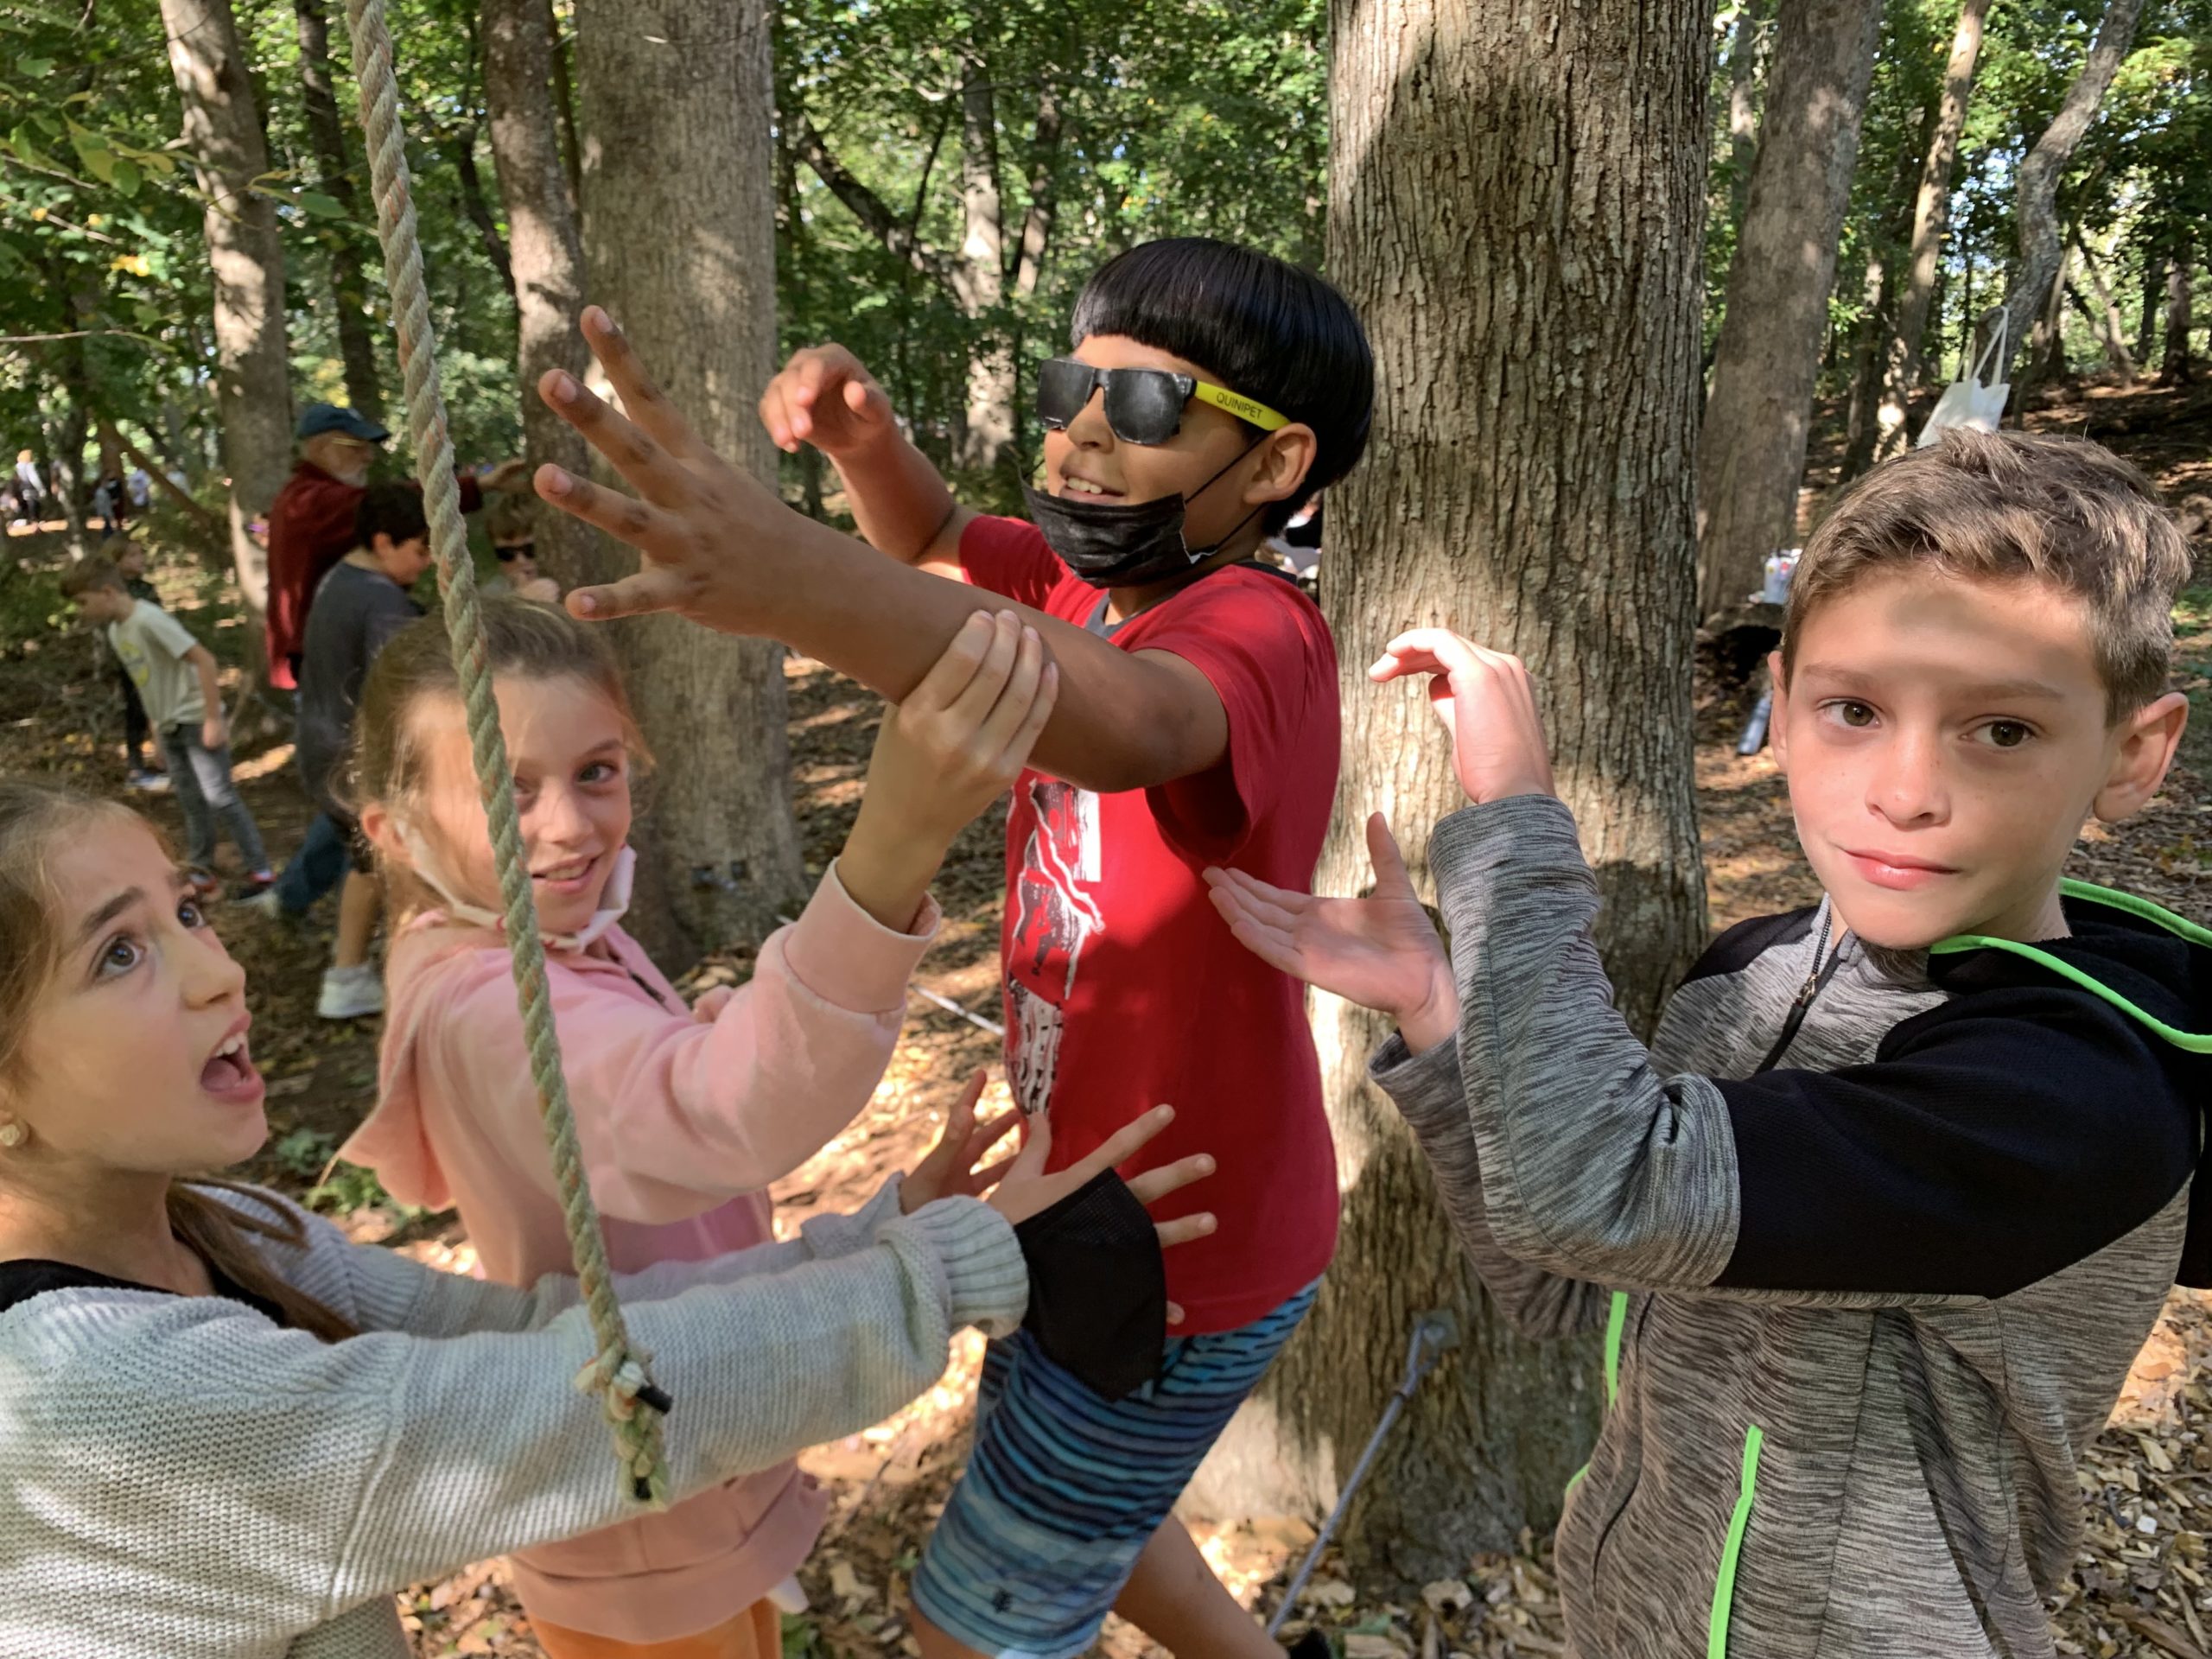 Sag Harbor Elementary School fifth graders traveled to Camp Quinipet for a day of team building and individual growth.